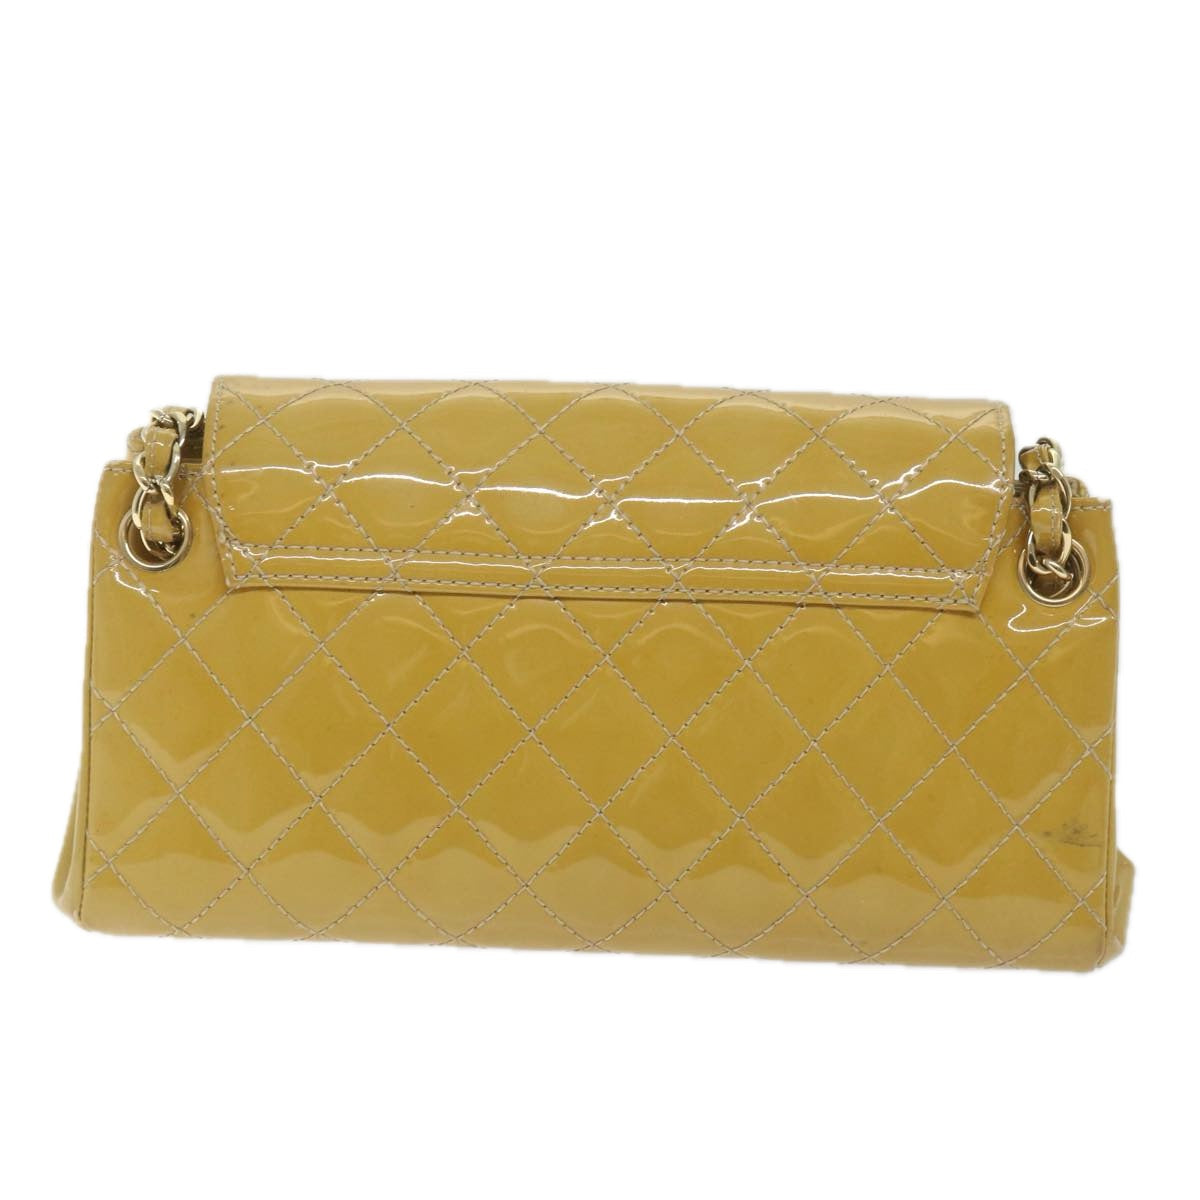 CHANEL Matelasse Chain Shoulder Bag Patent leather Yellow CC Auth 58350A - 0